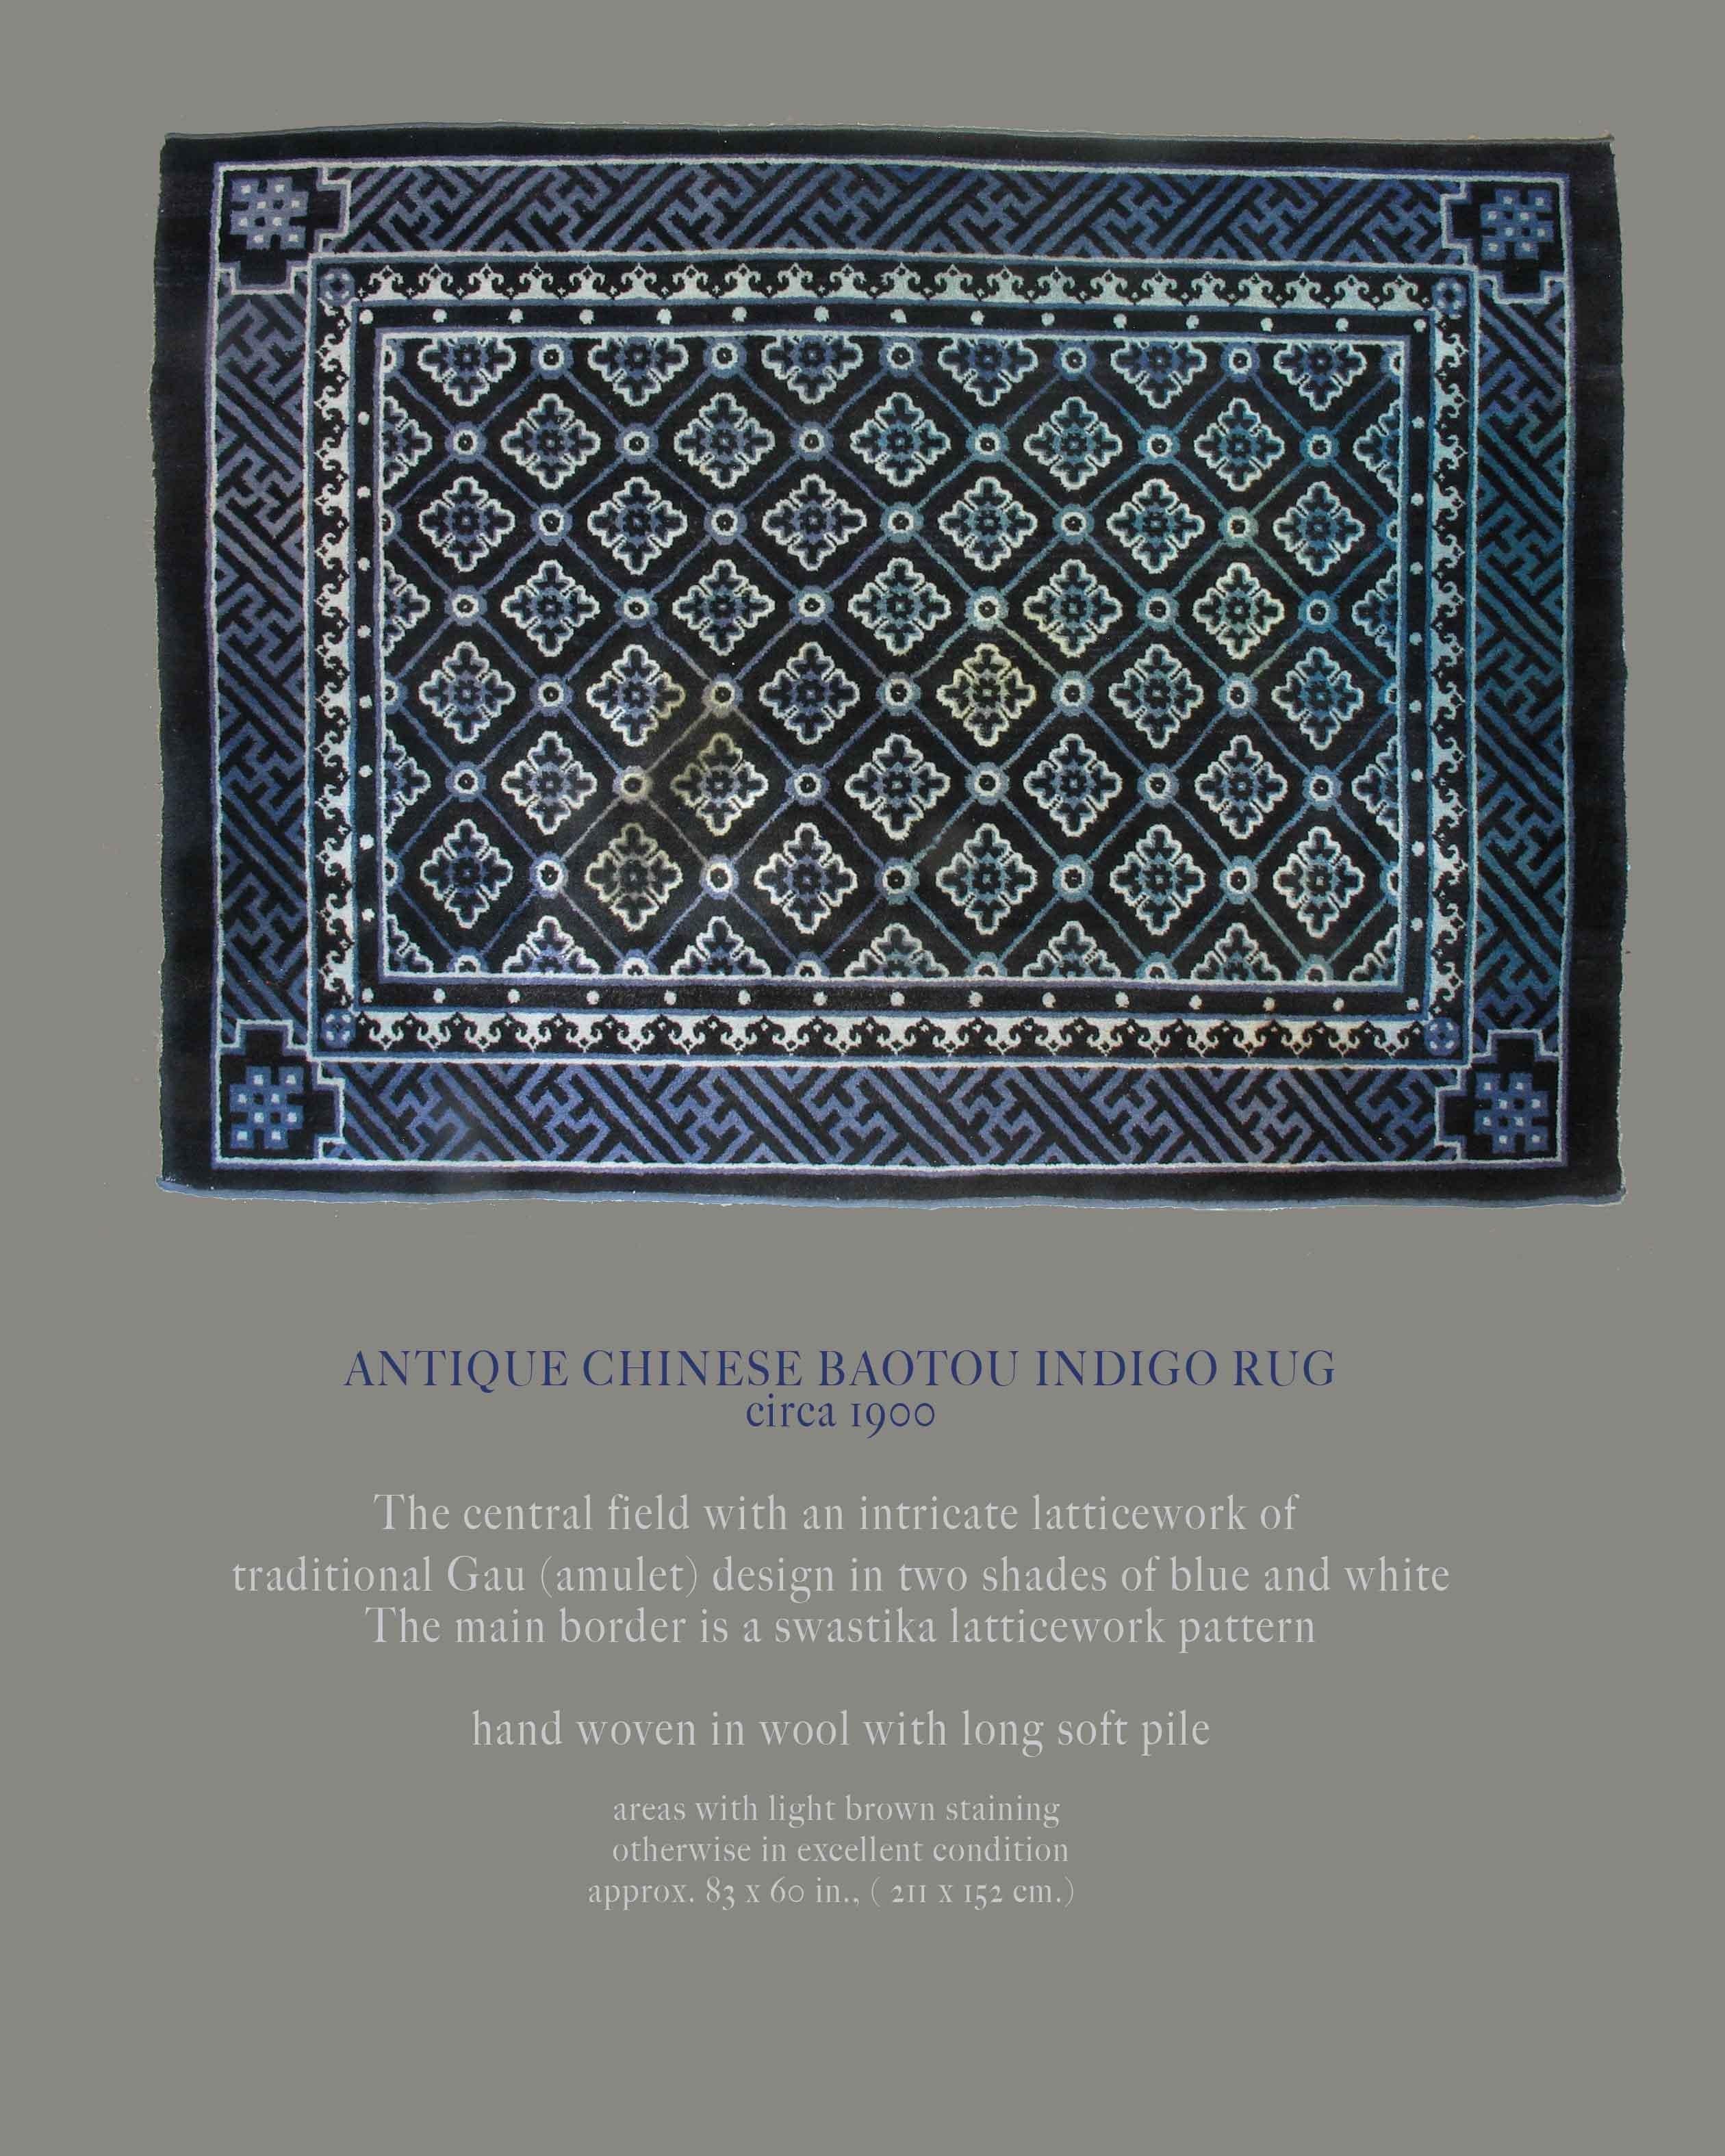 Antique Chinese Baotou indigo rug, circa 1900. The central field with an intricate lattice work of Traditional Gau (Amulet) design in two shades of blue and white. The main border is a swastika lattice work pattern, handwoven in wool with long soft